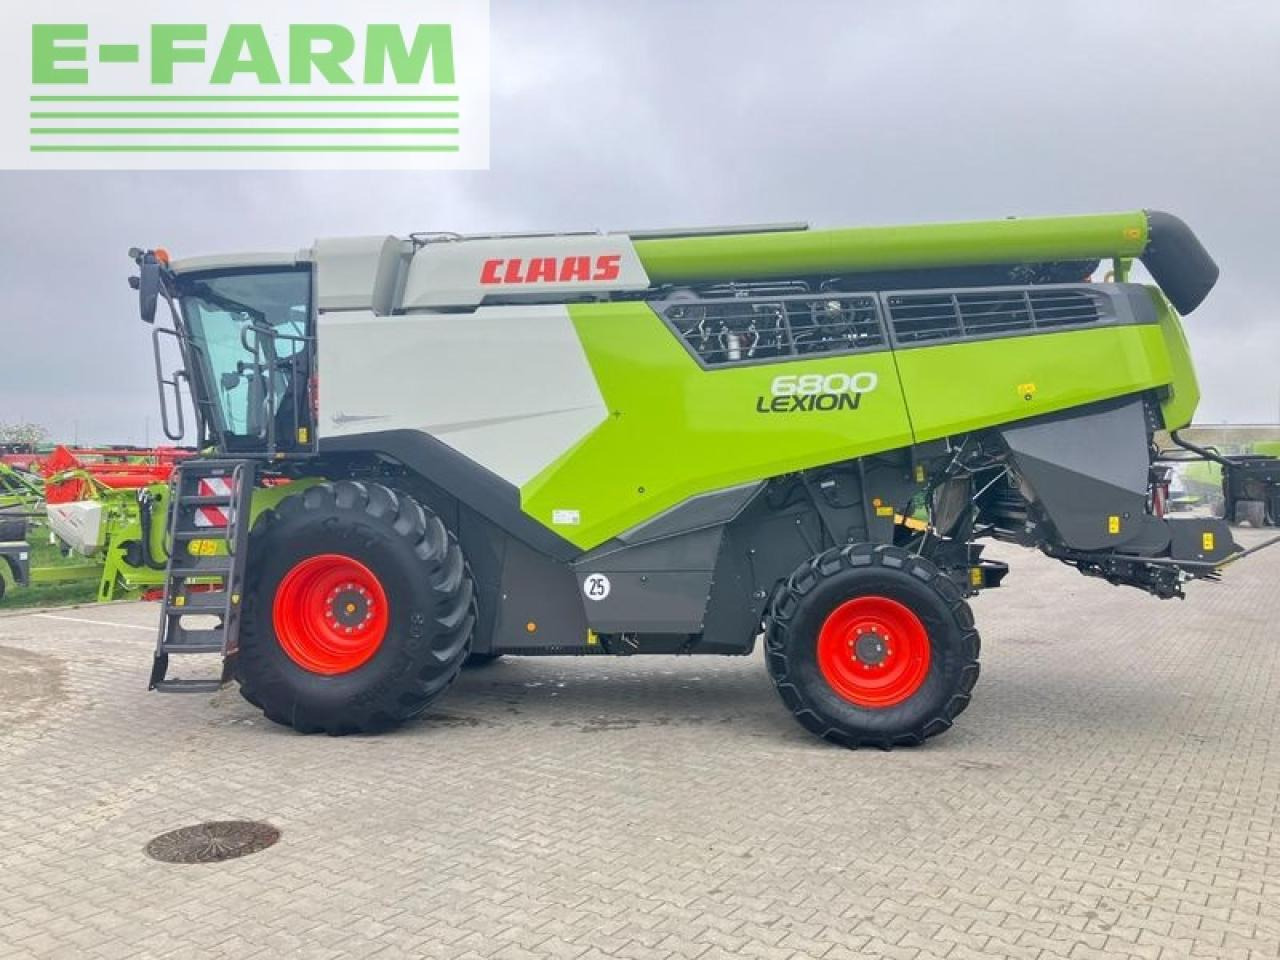 Combine harvester CLAAS lexion 6800: picture 6